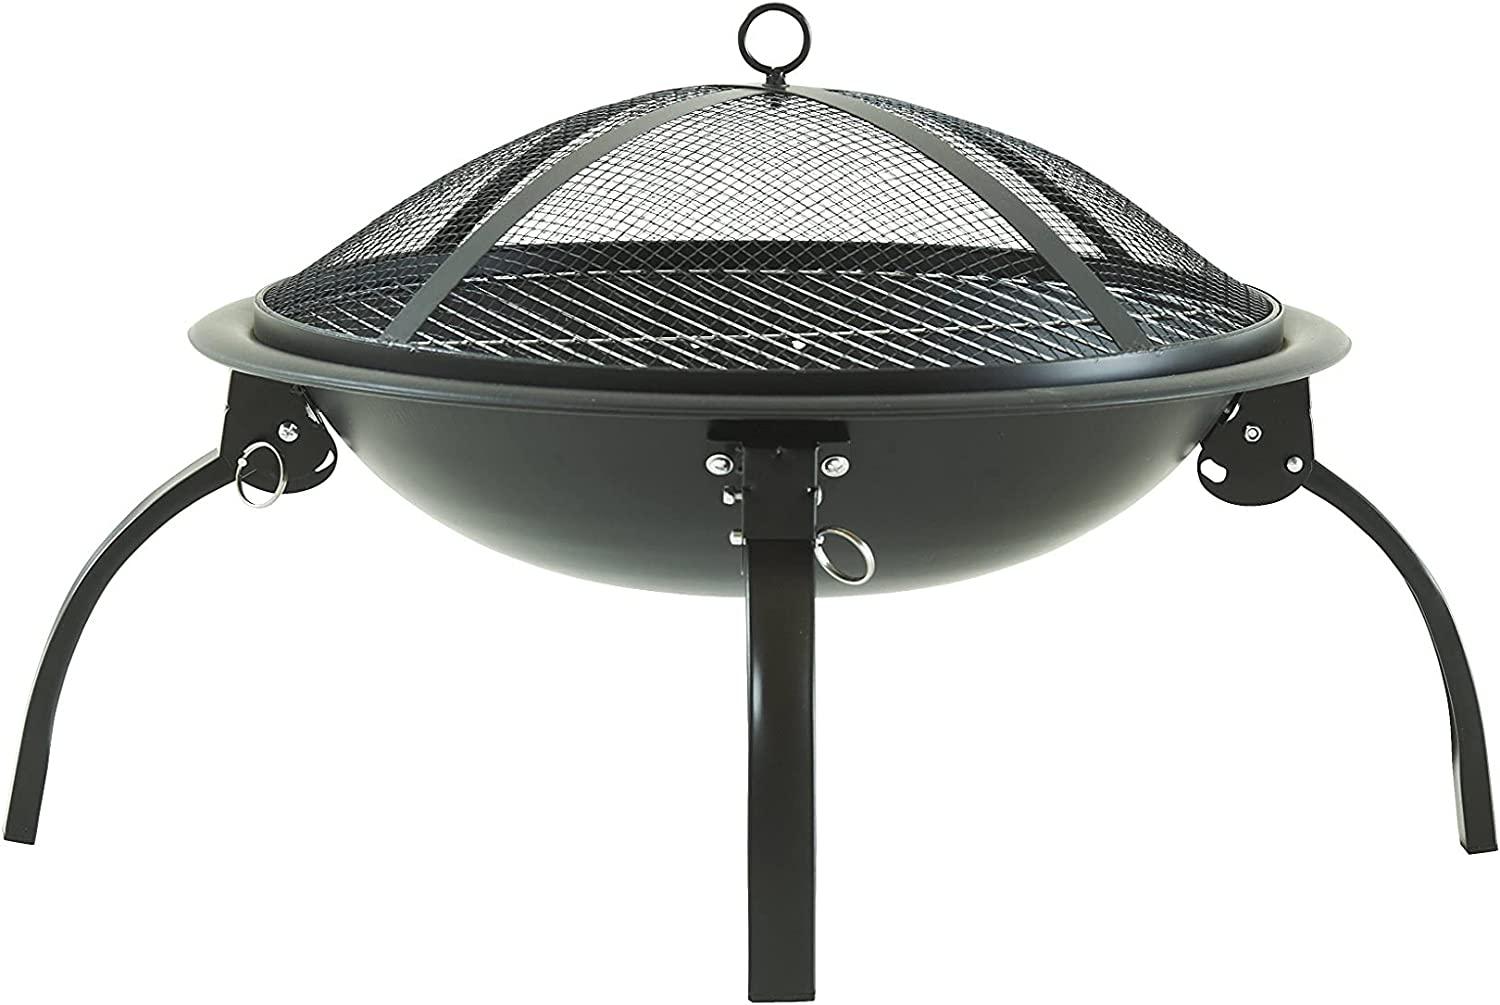 Black Garden Steel Fire Pit Outdoor Heater with Carry Case - Home Inspired Gifts